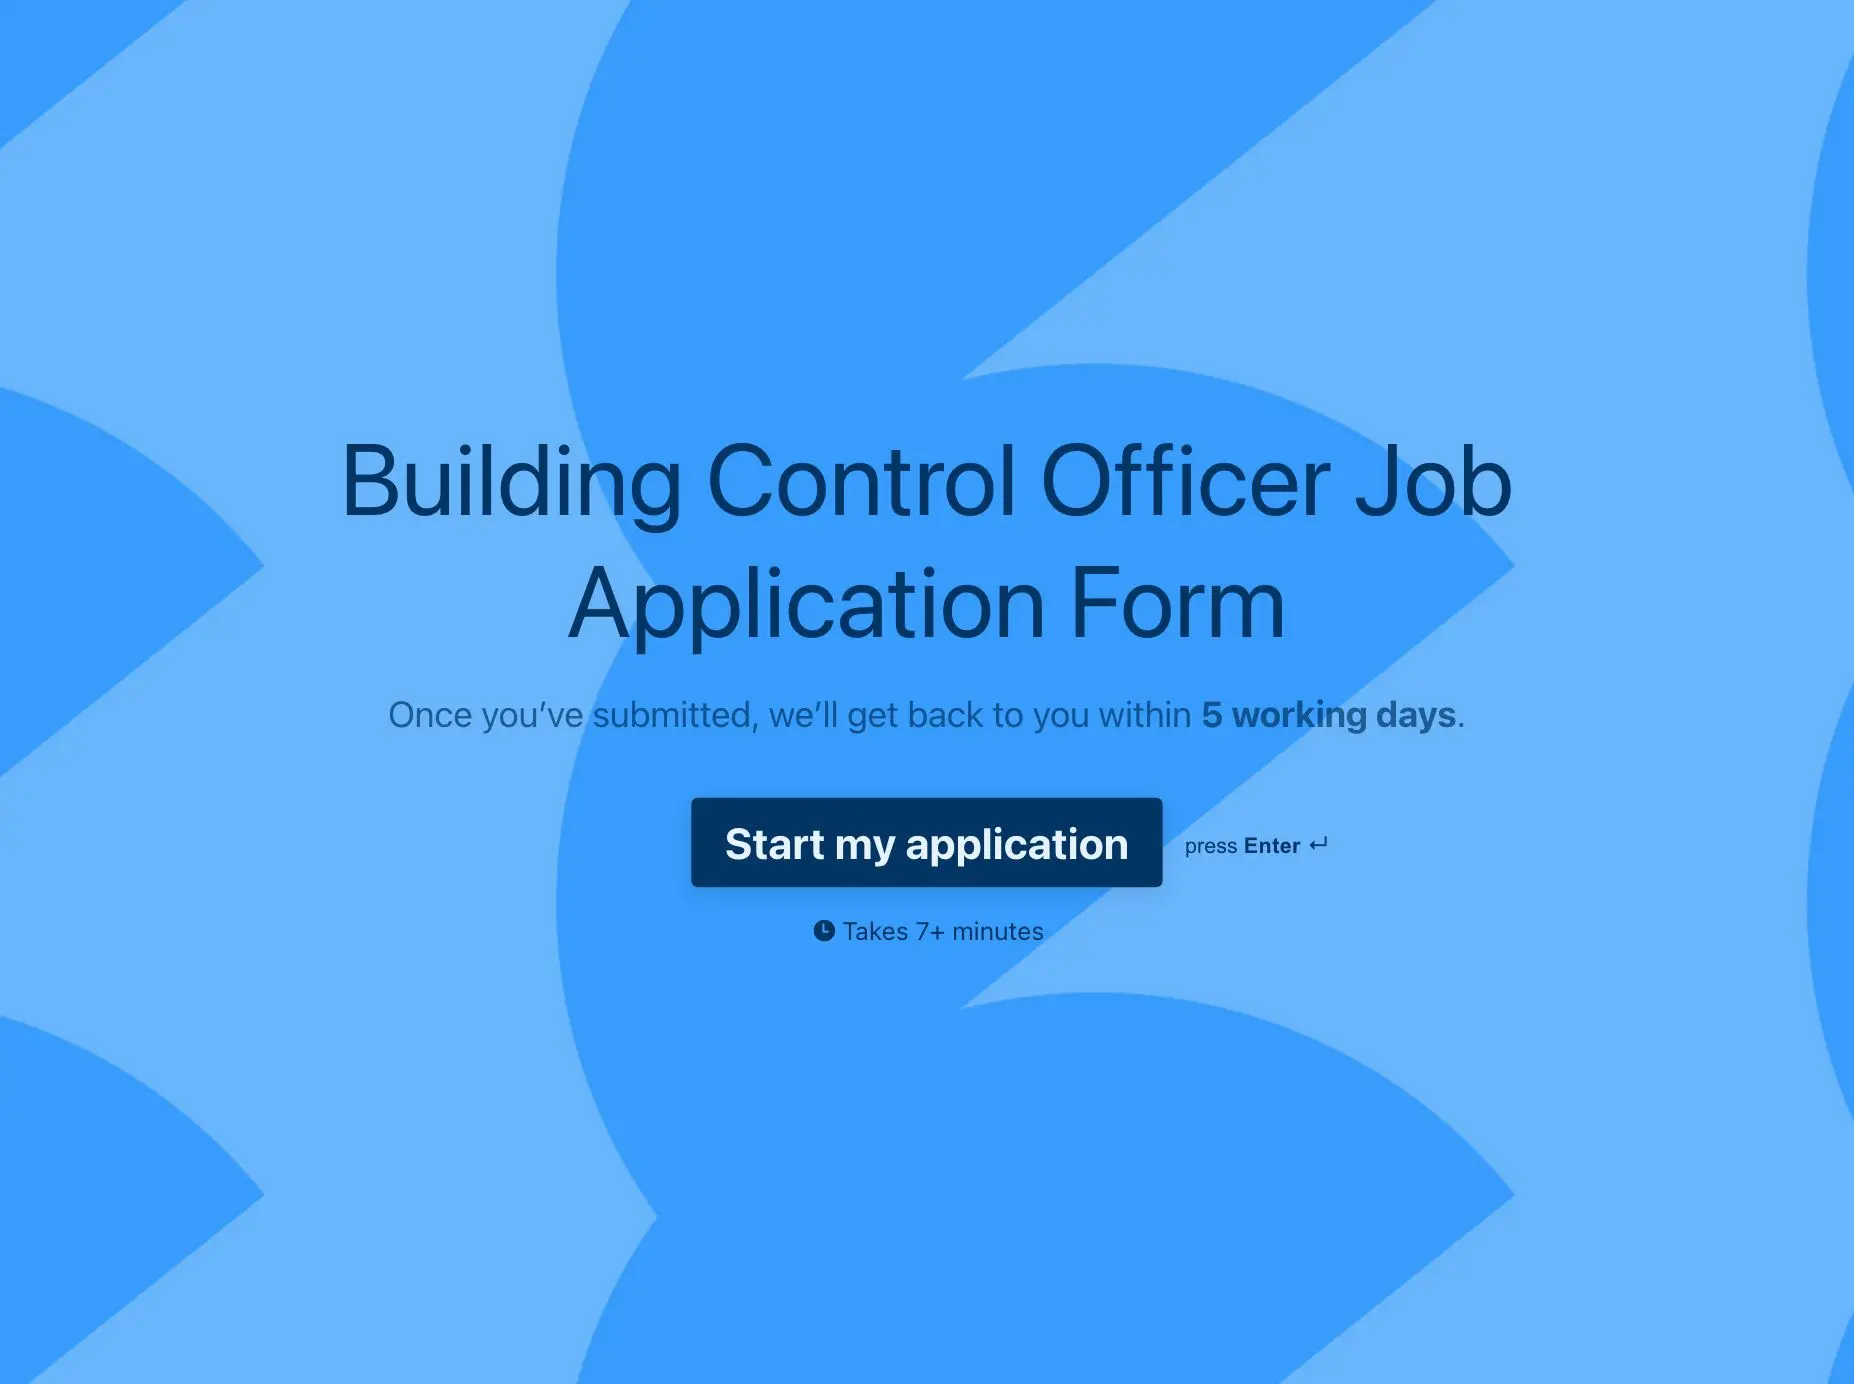 Building Control Officer Job Application Form Template Hero